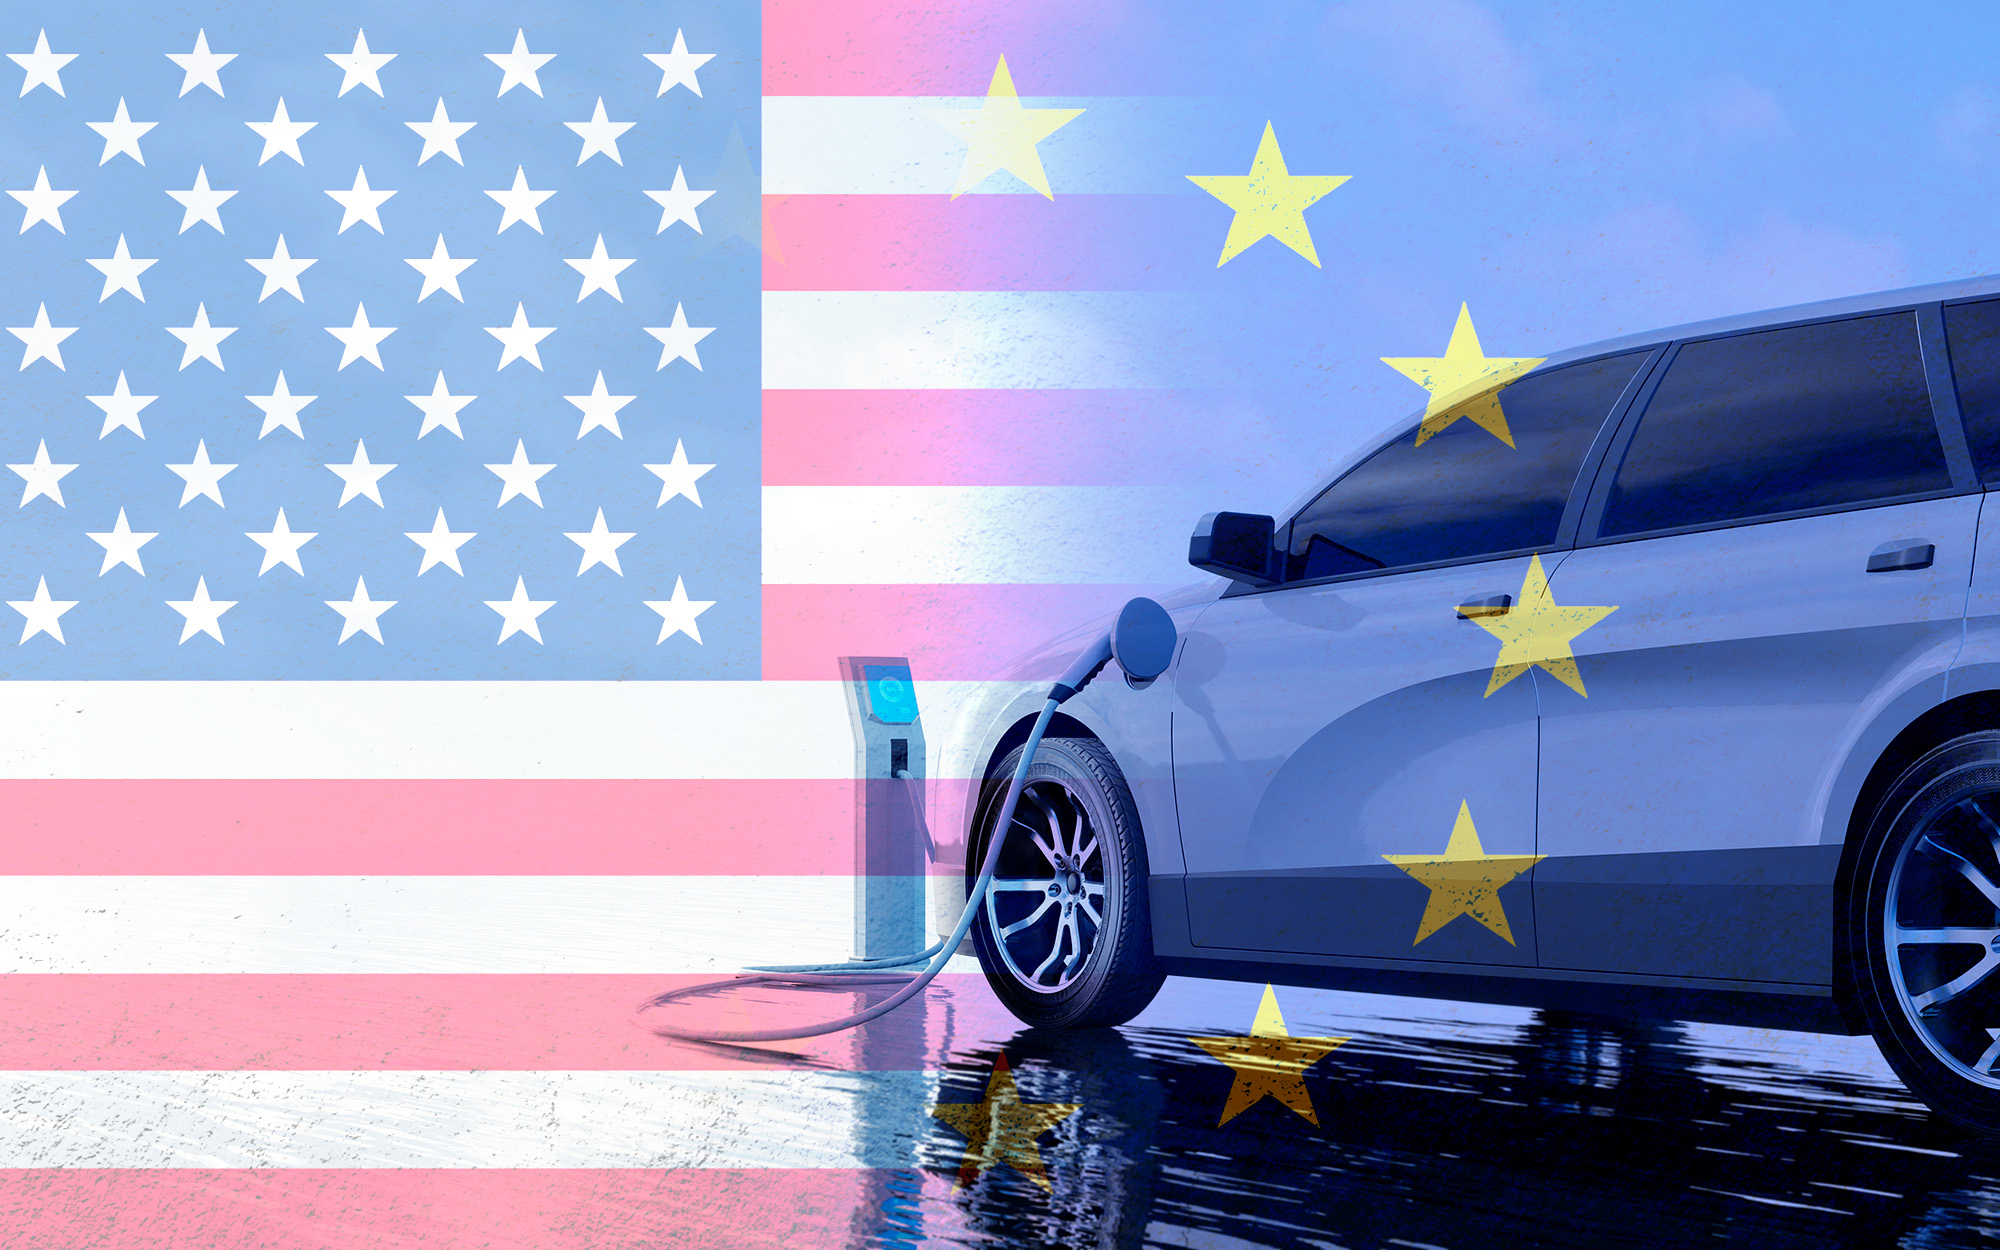 Miles apart: U.S. and Europe diverge on Chinese EVs